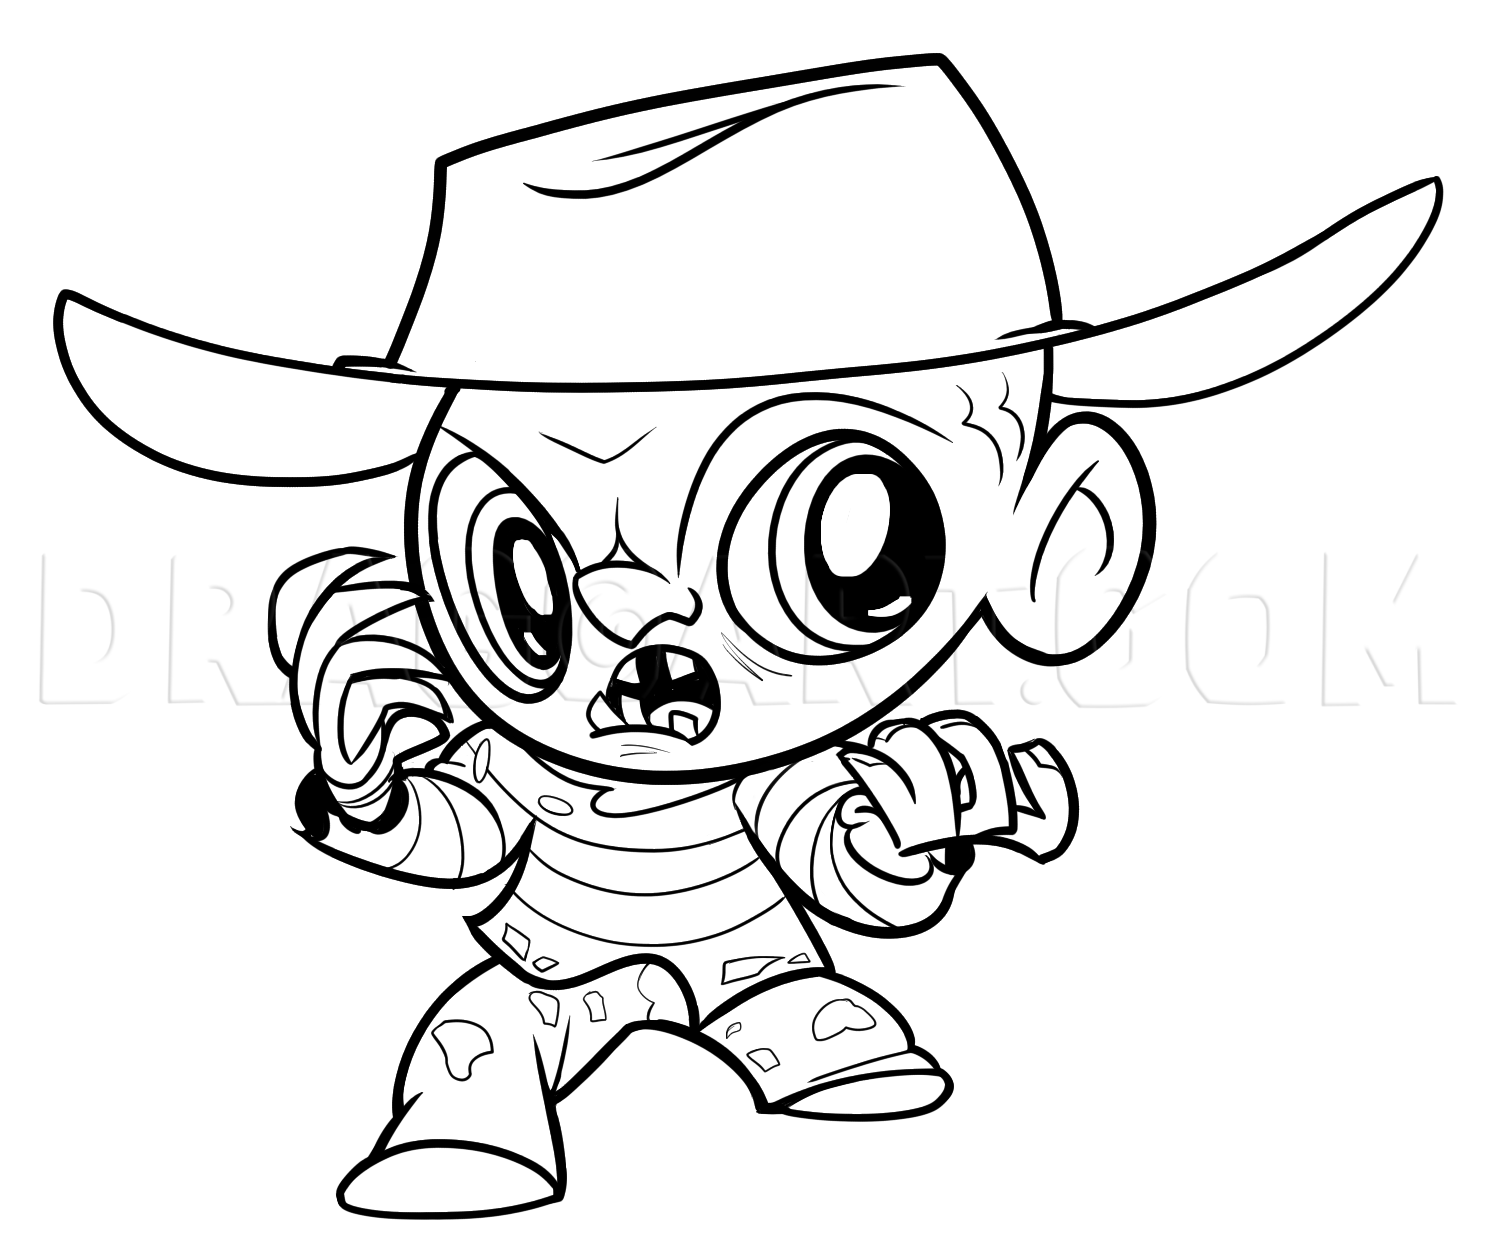 Baby Freddy Krueger Coloring Coloring Page